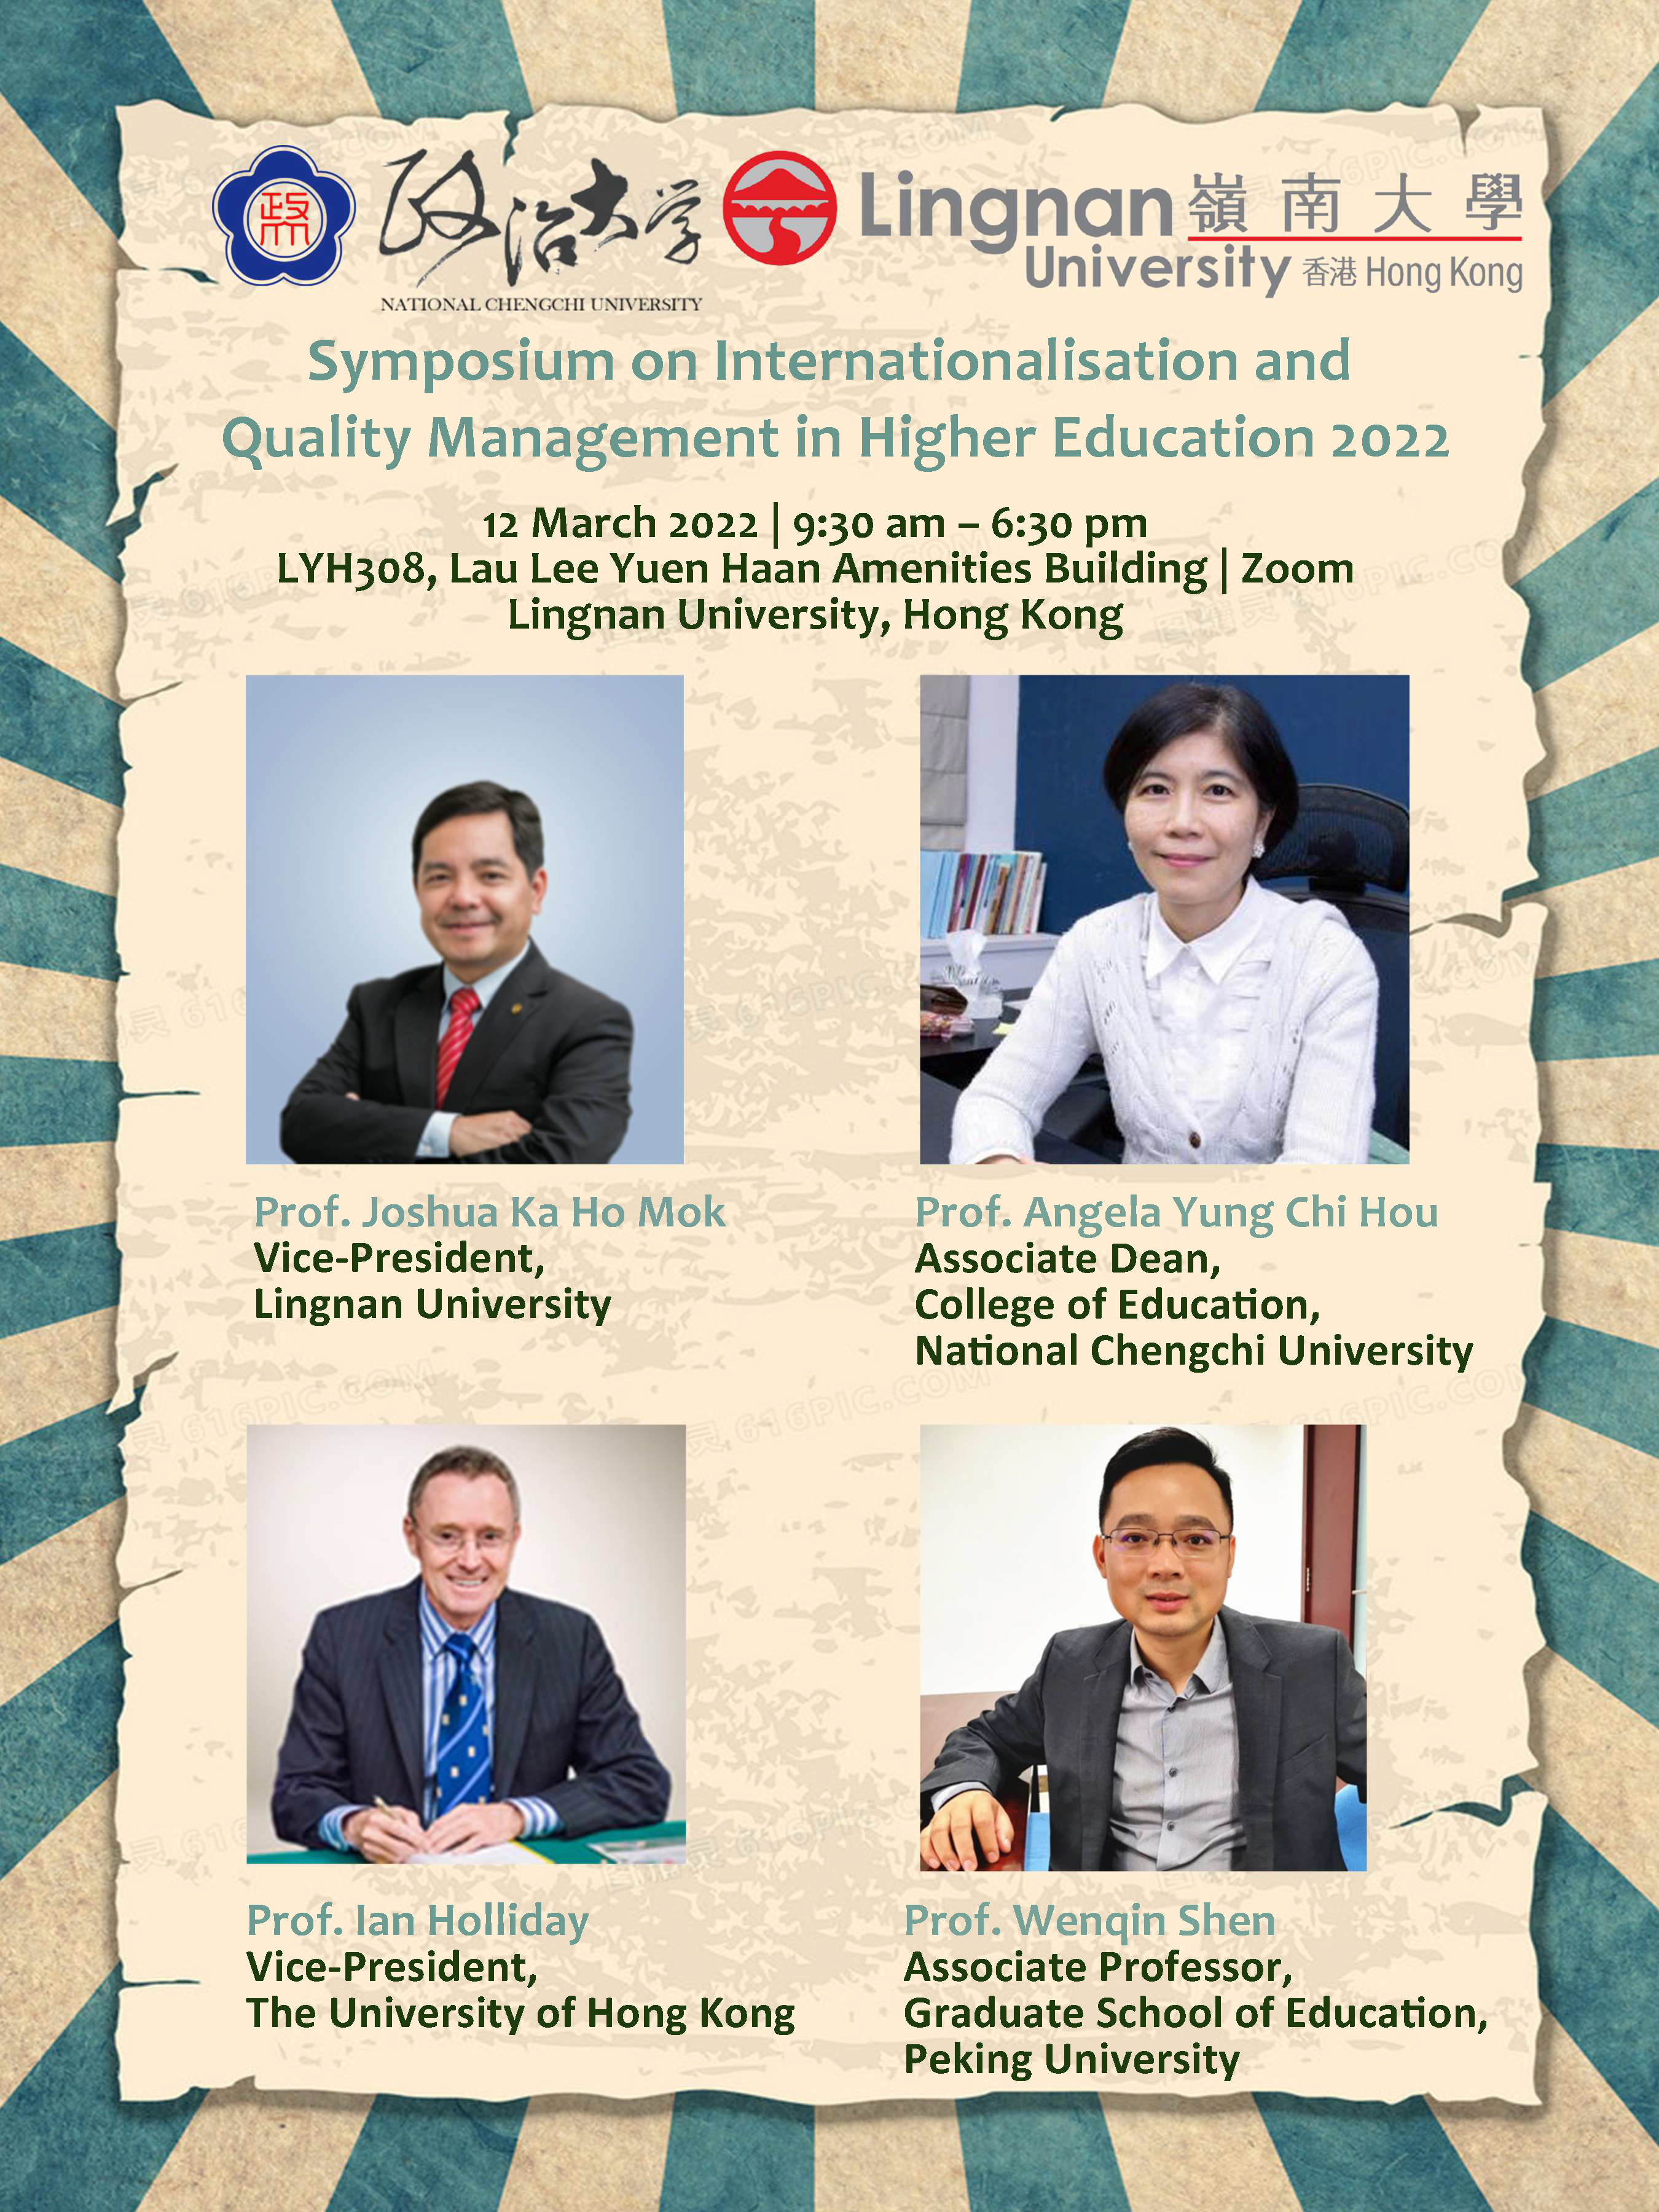 Symposium on Internationalisation and Quality Management in Higher Education 2022